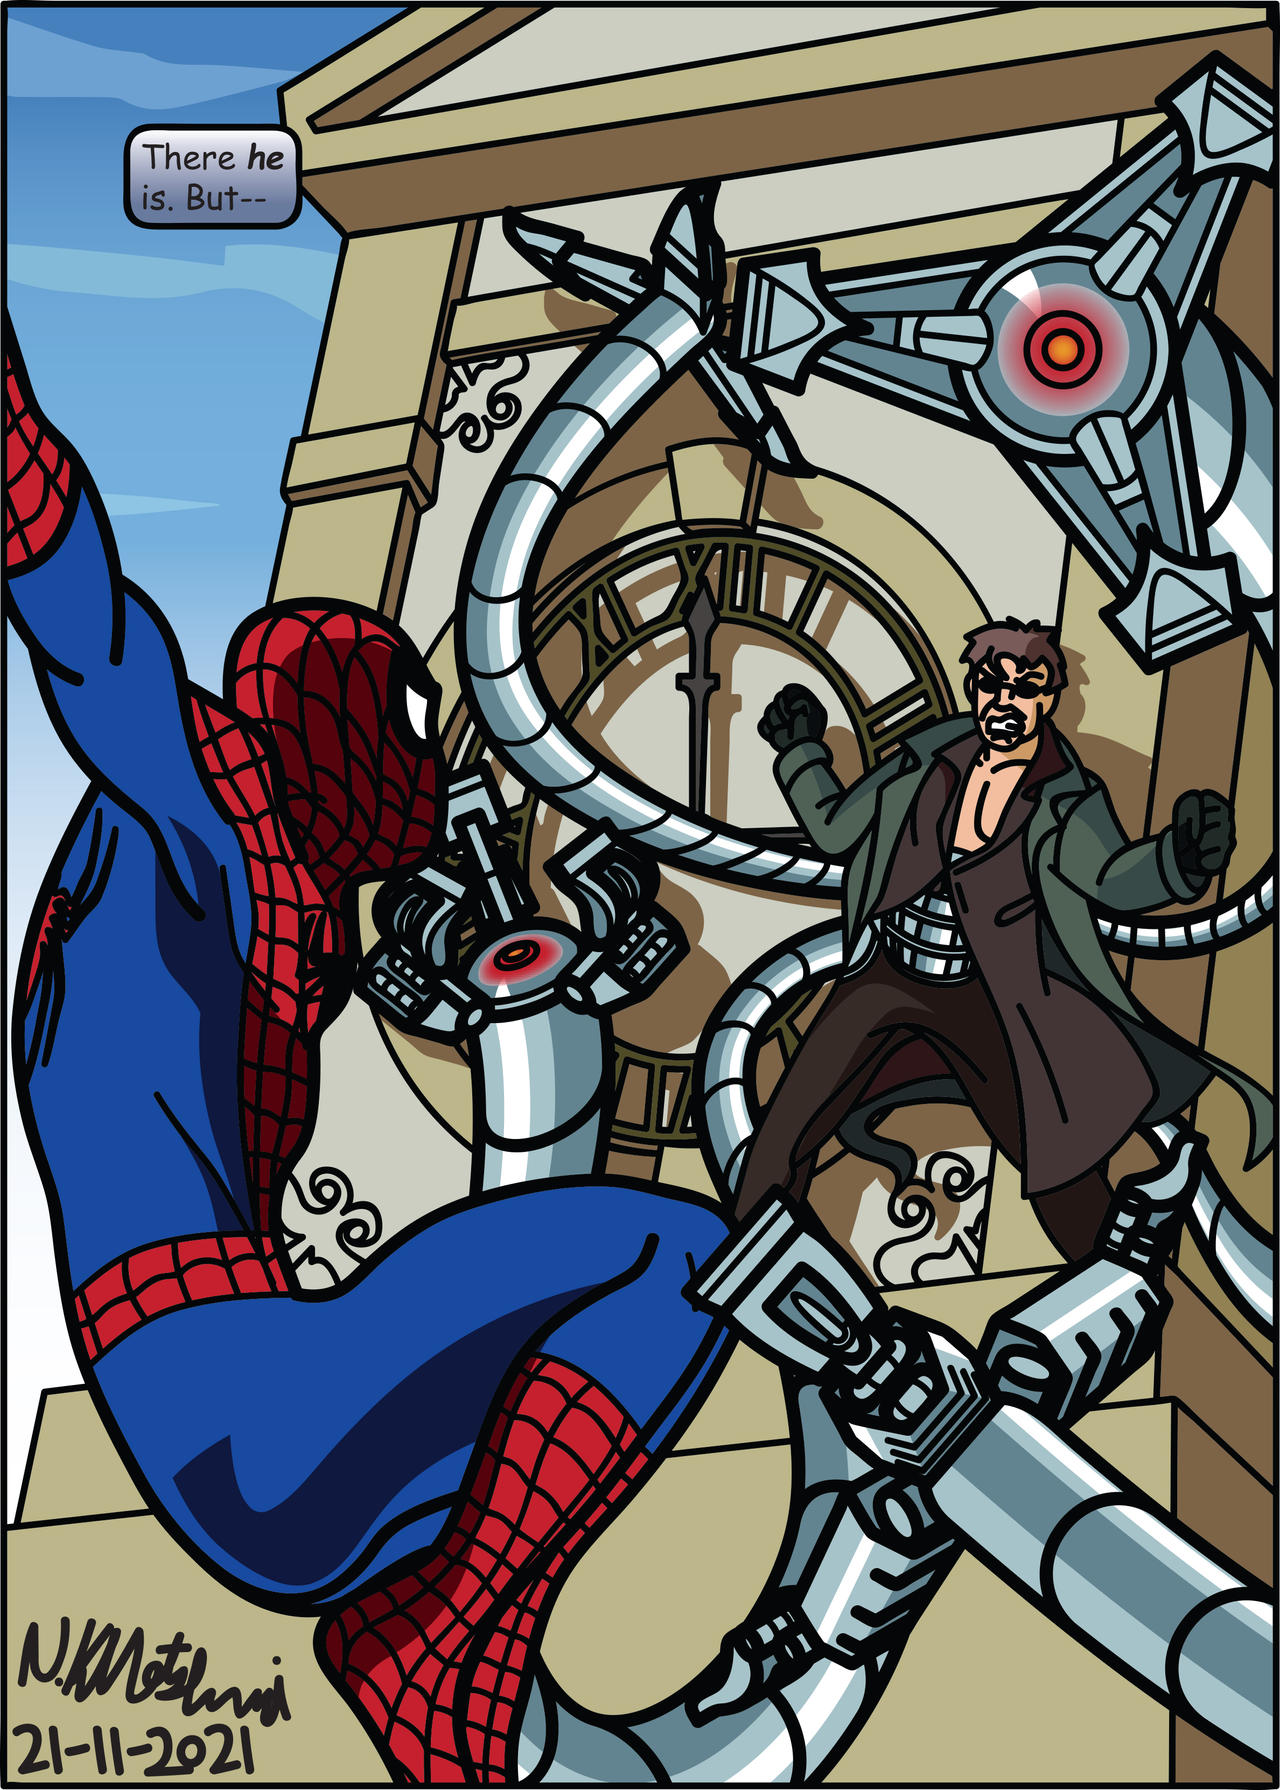 Doctor Octopus - Best Scenes from Spider-Man 2 (2004) Alfred